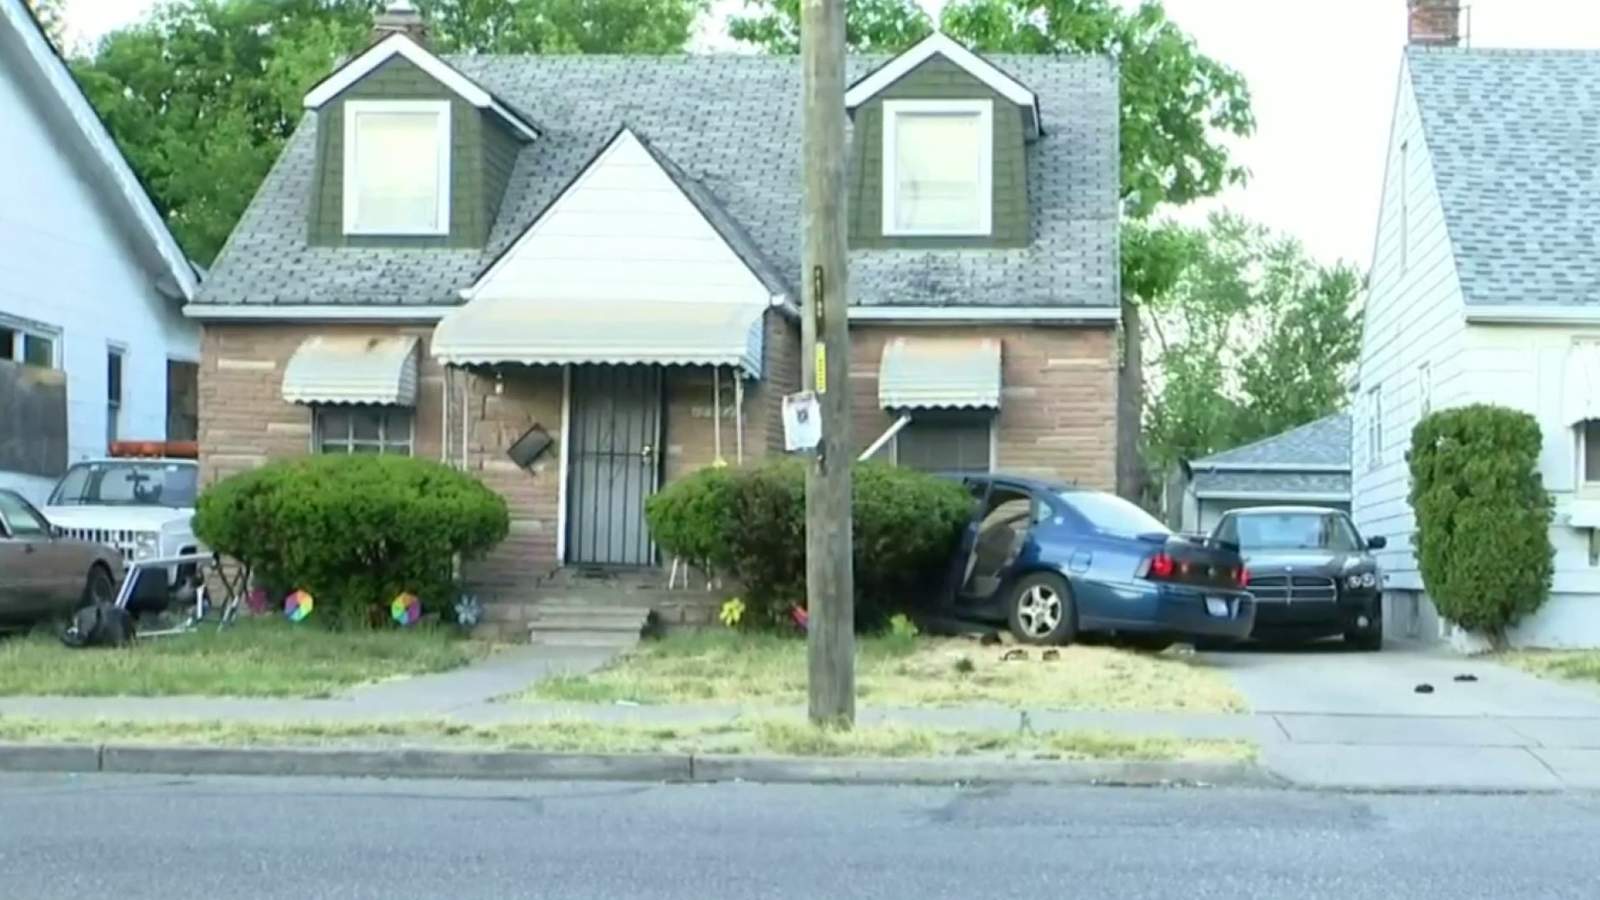 Witness says 2 girls were trapped after car crashed into house on Detroit’s east side